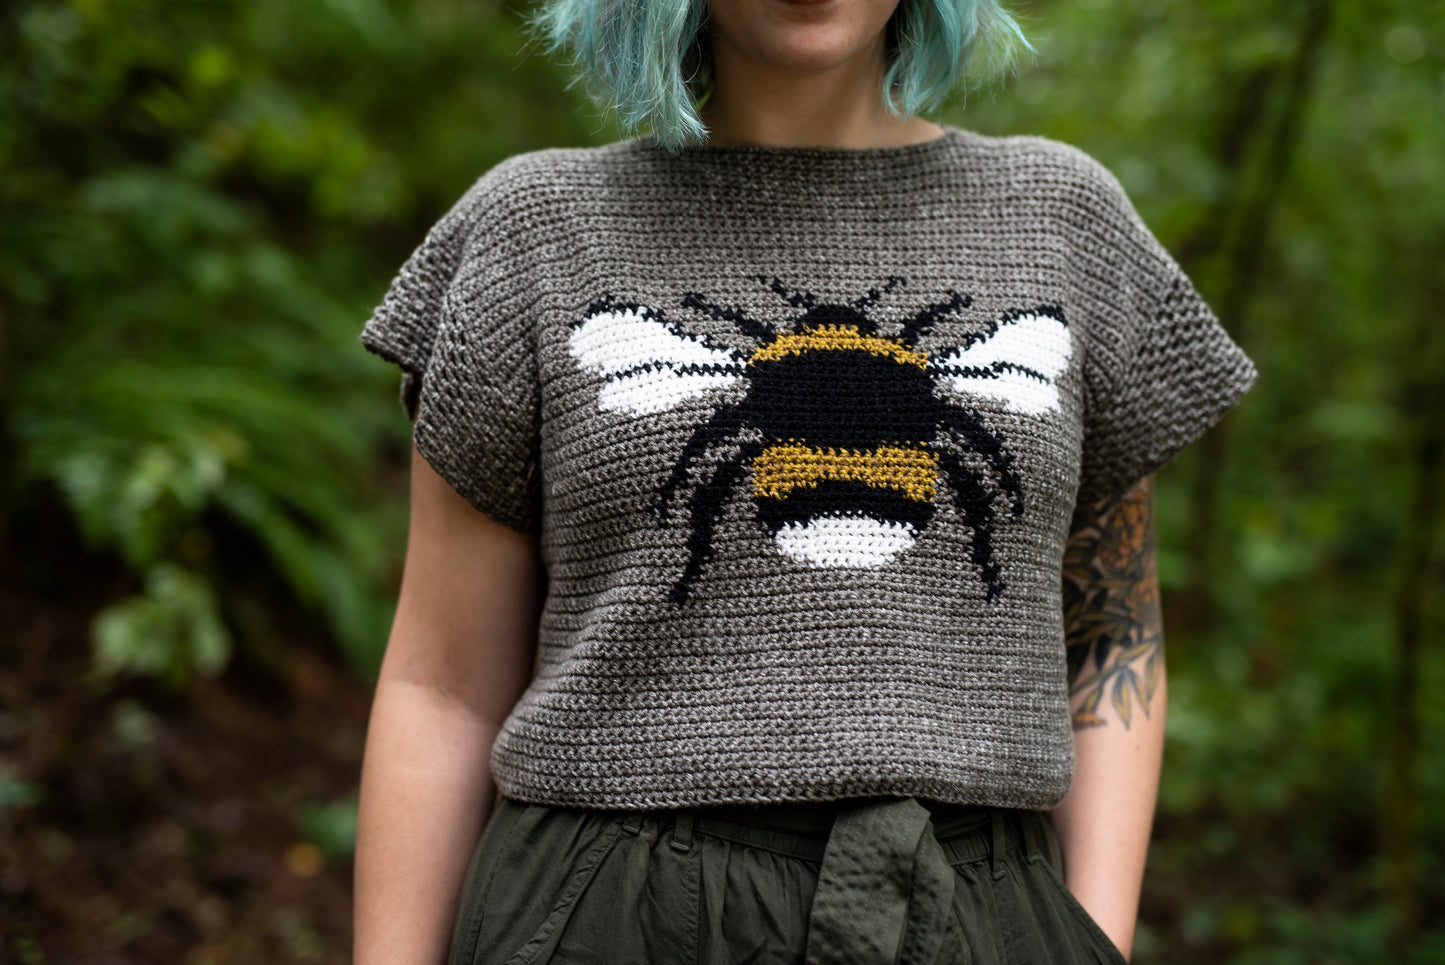 Crochet Pattern: The Bumble Tee